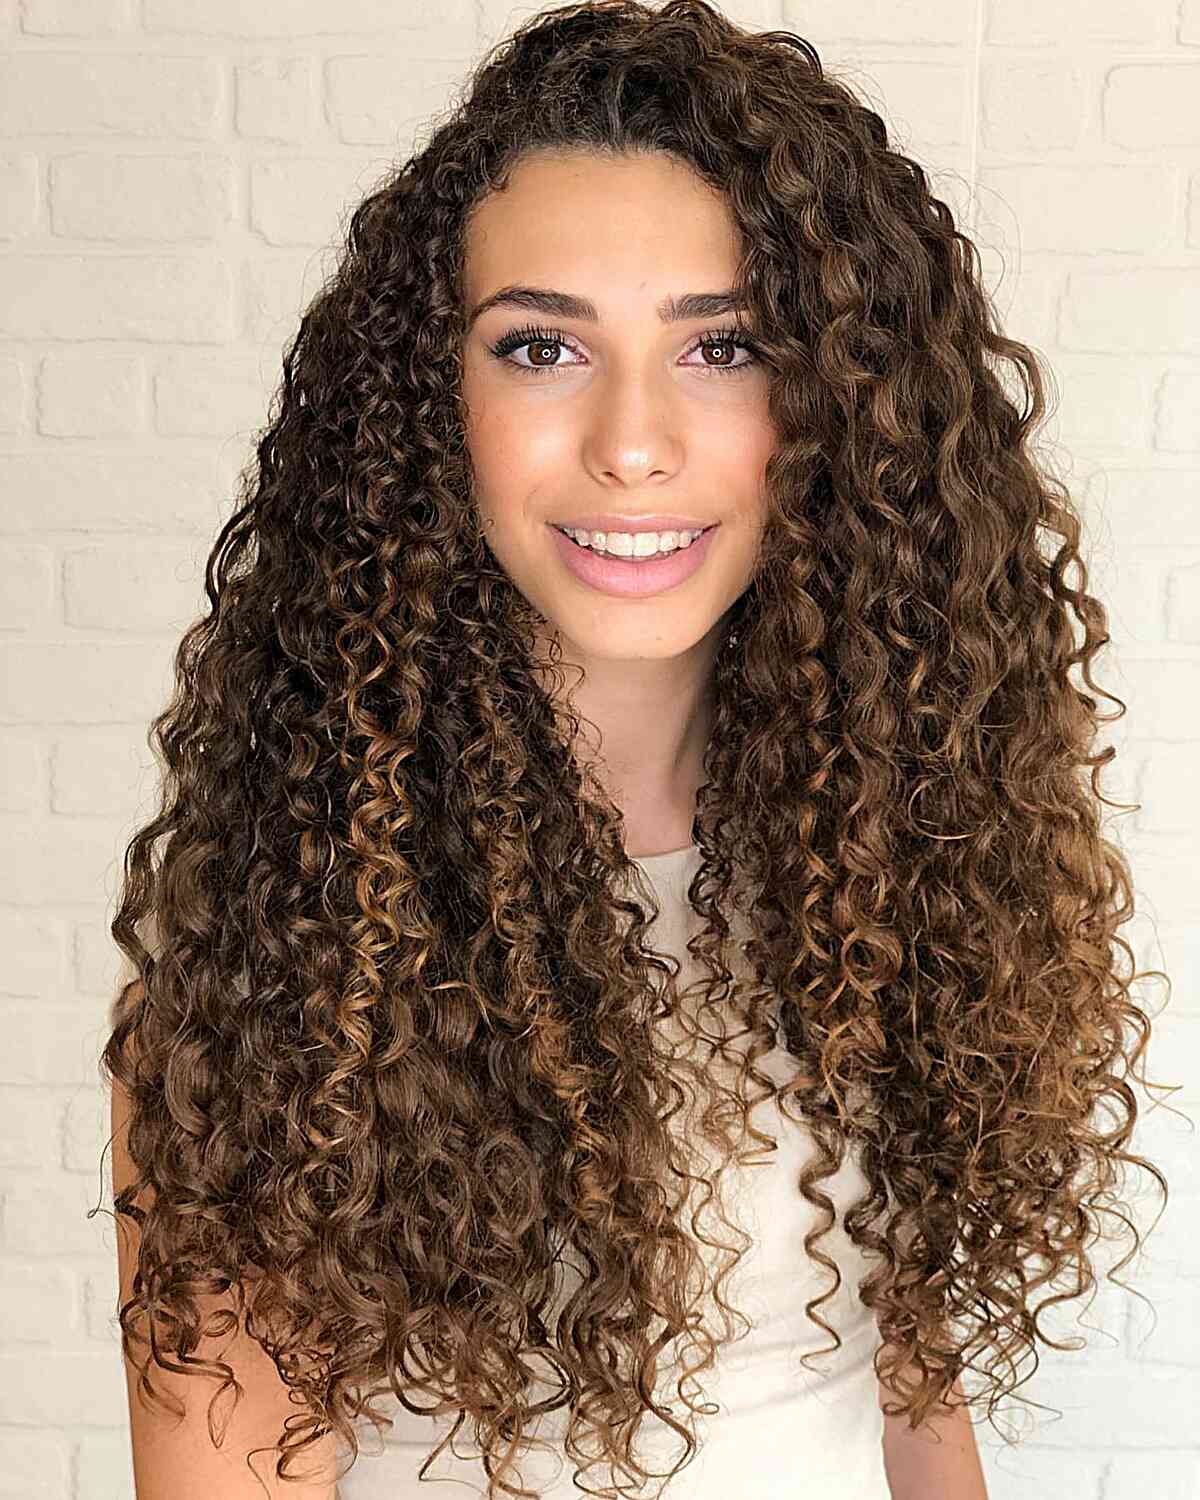 Curly Hair. Add To Your Photo ID:15981